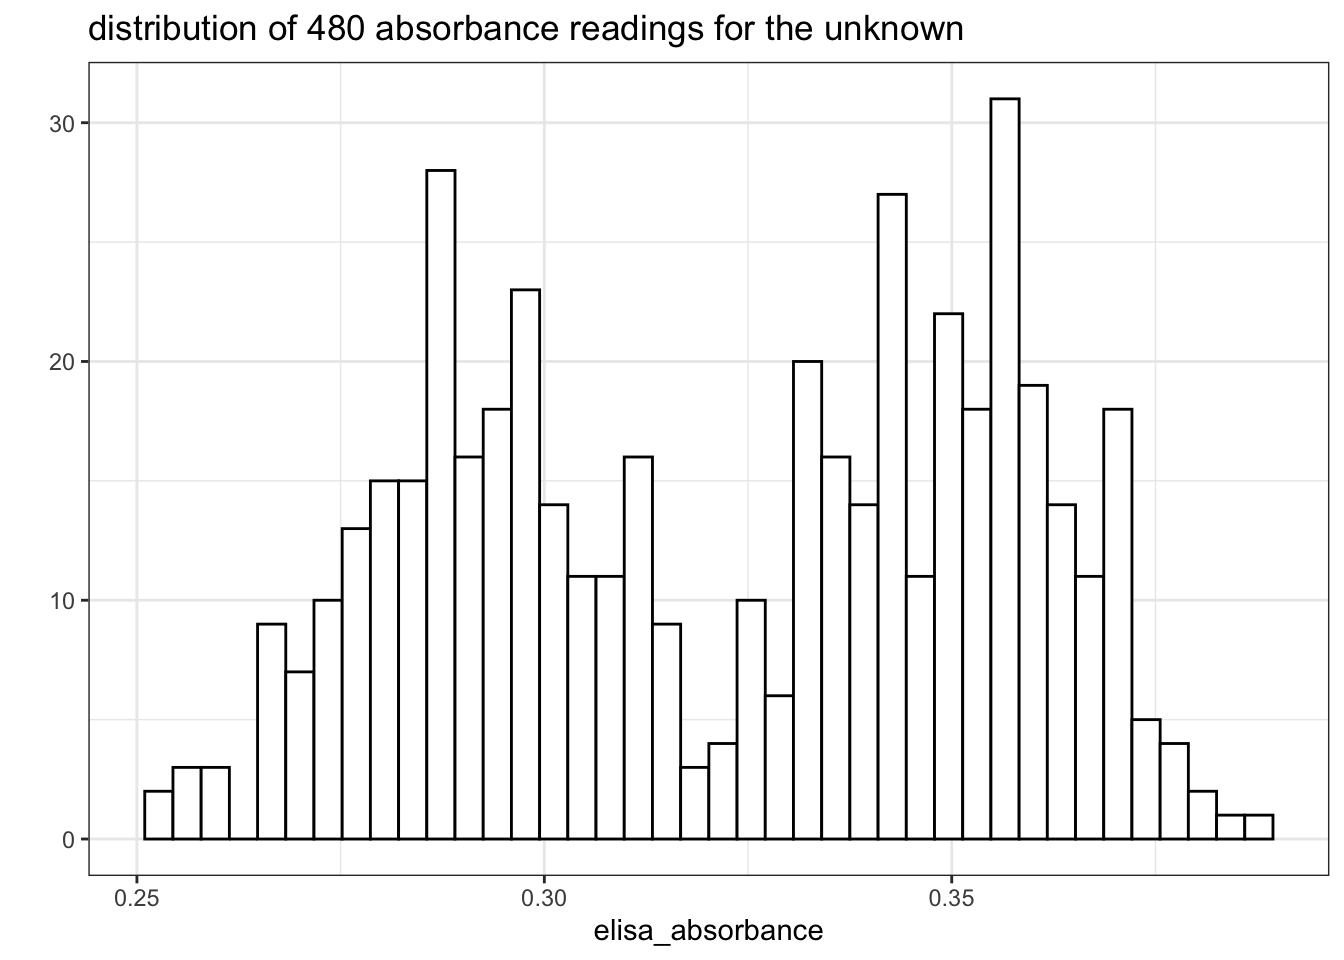 Distribution of 480 absorbance readings for the ELISA assay with 1:1000 unknown sample and 1:40000 antibody